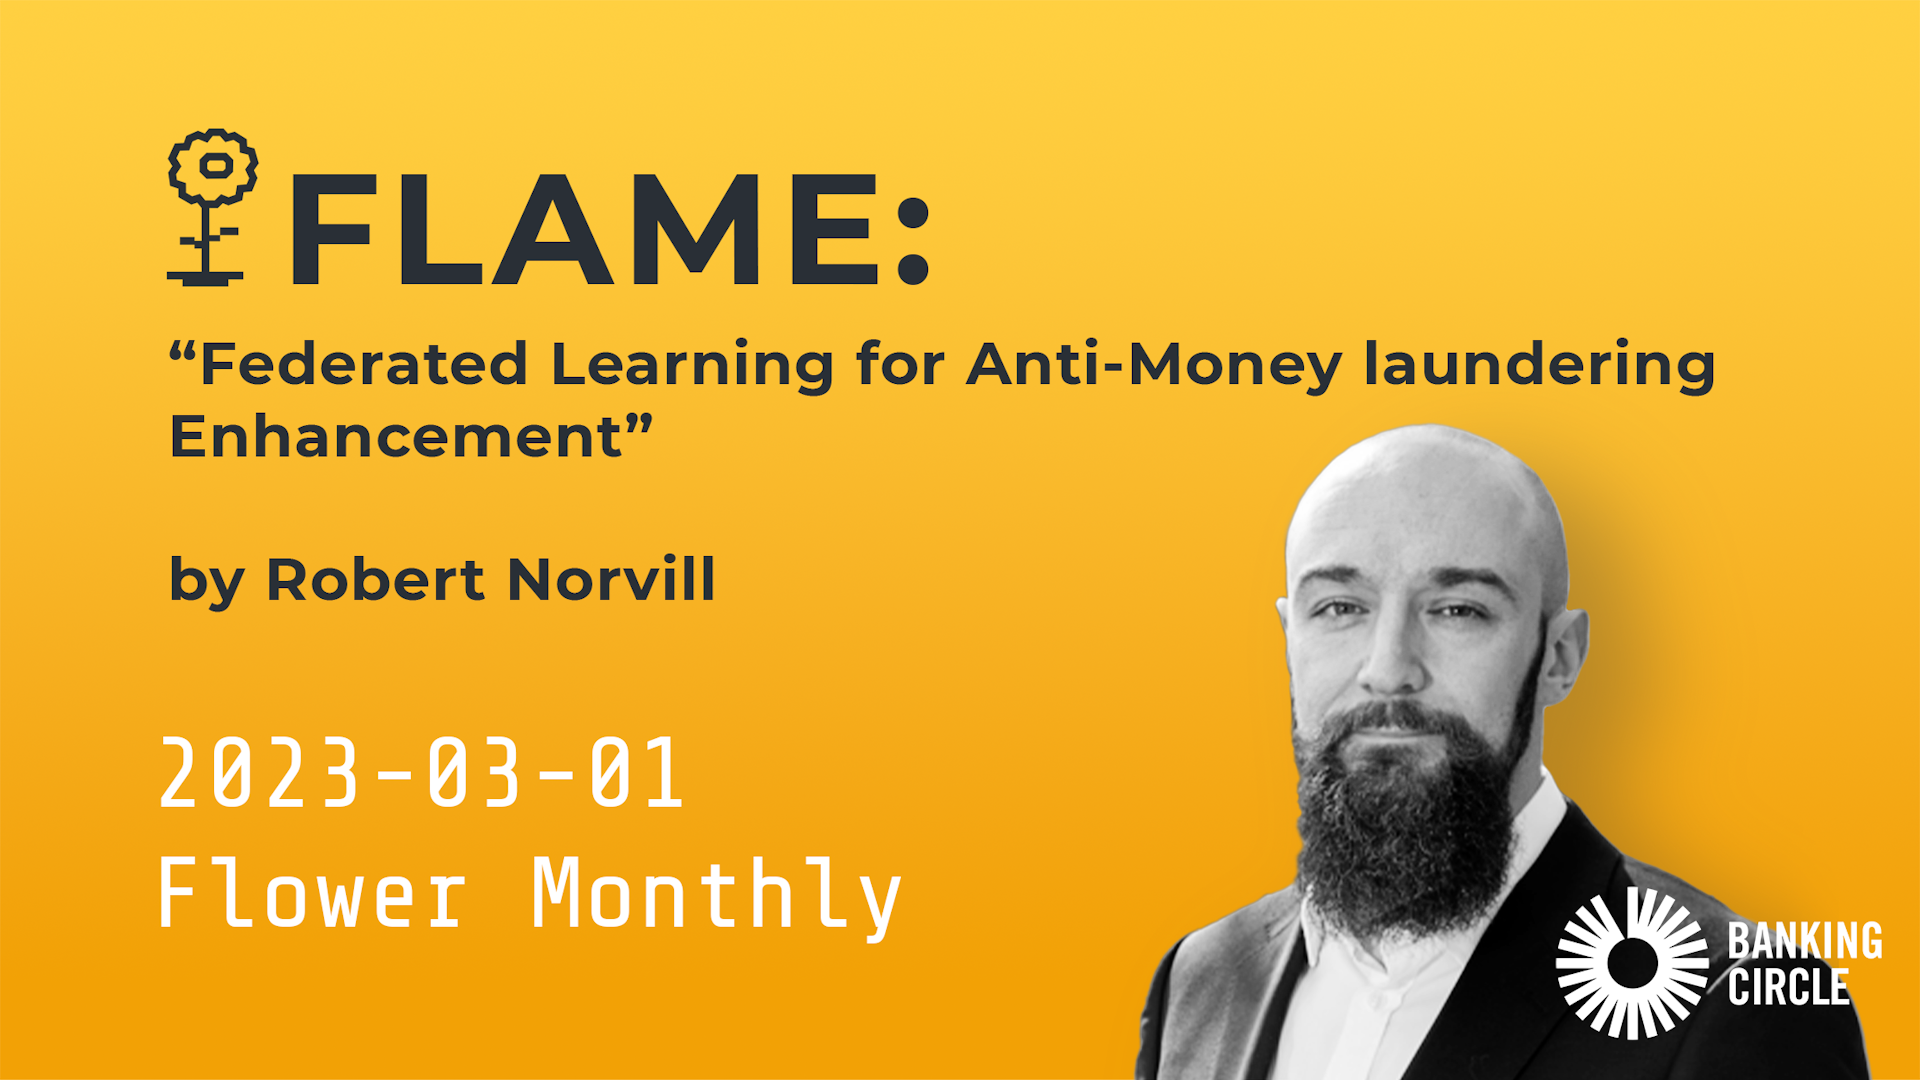 Federated Learning for Anti-Money laundering Enhancement (FLAME)